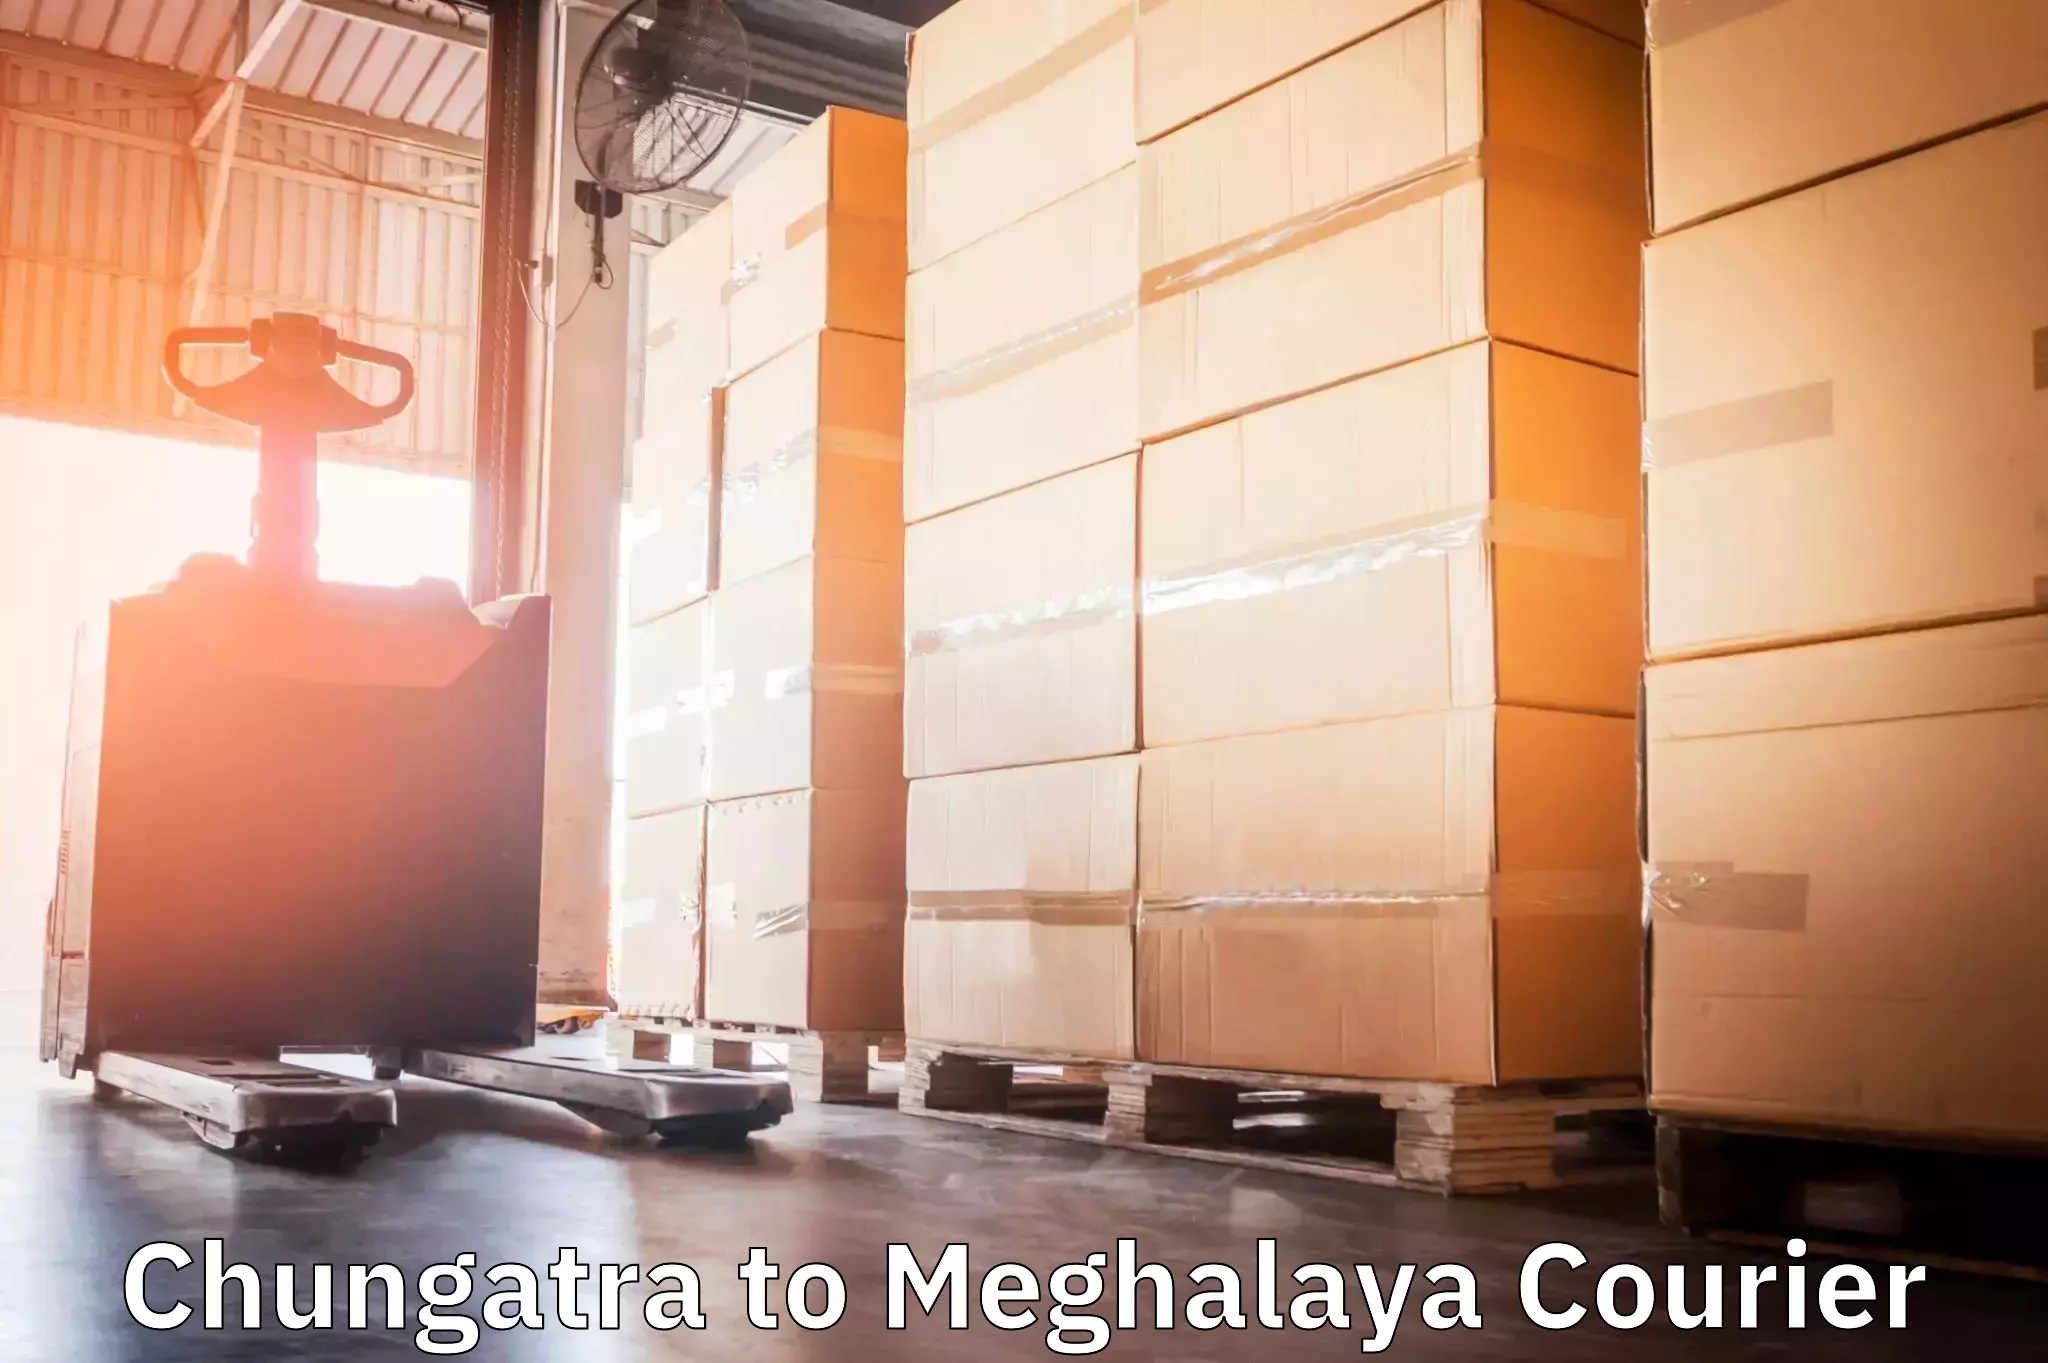 24-hour courier services Chungatra to Meghalaya